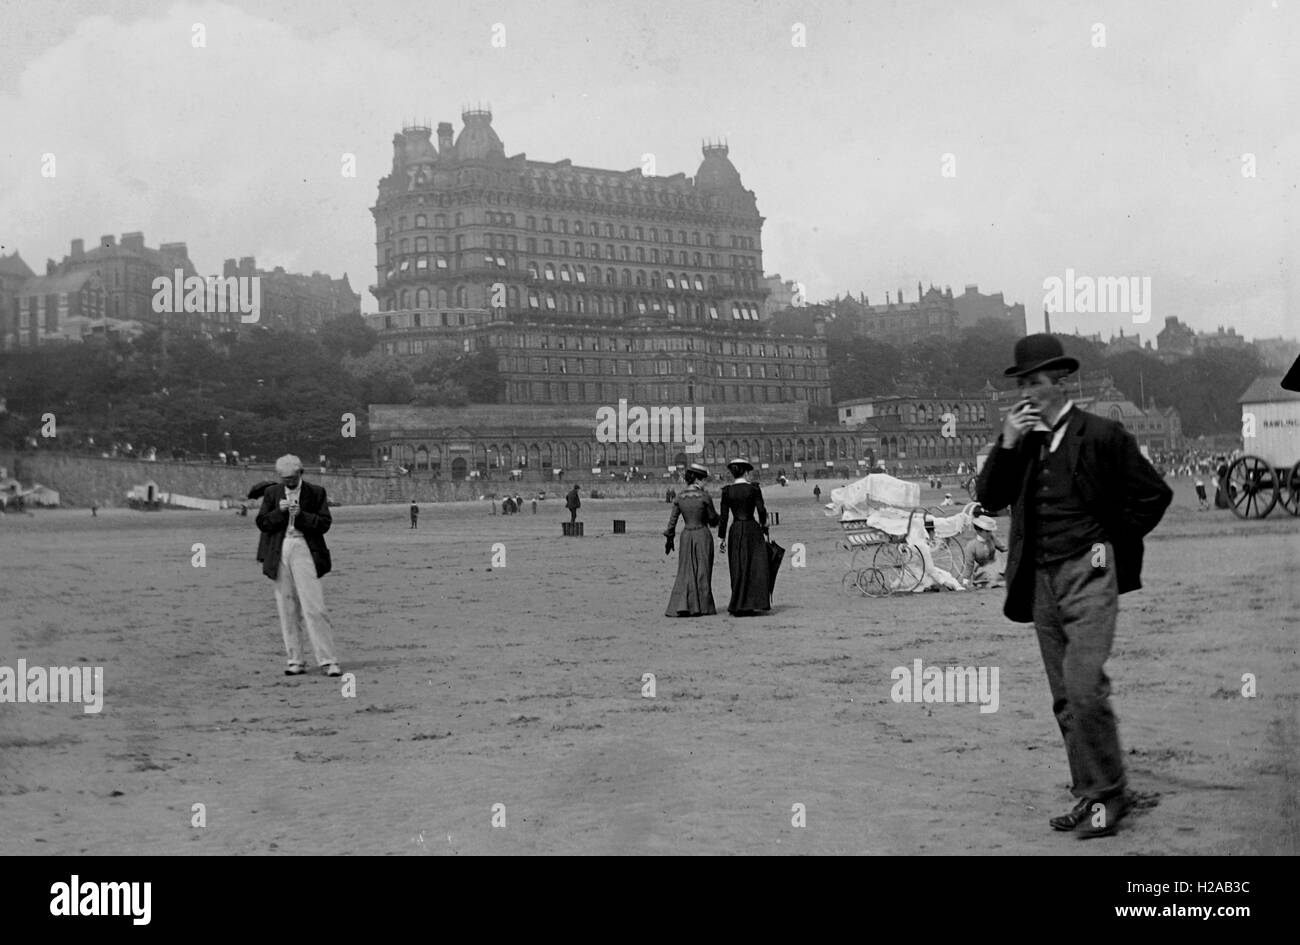 Beach scene including The Grand Hotel, South Bay, Scarborough, Yorkshire c1910.  Photo by Tony Henshaw Stock Photo